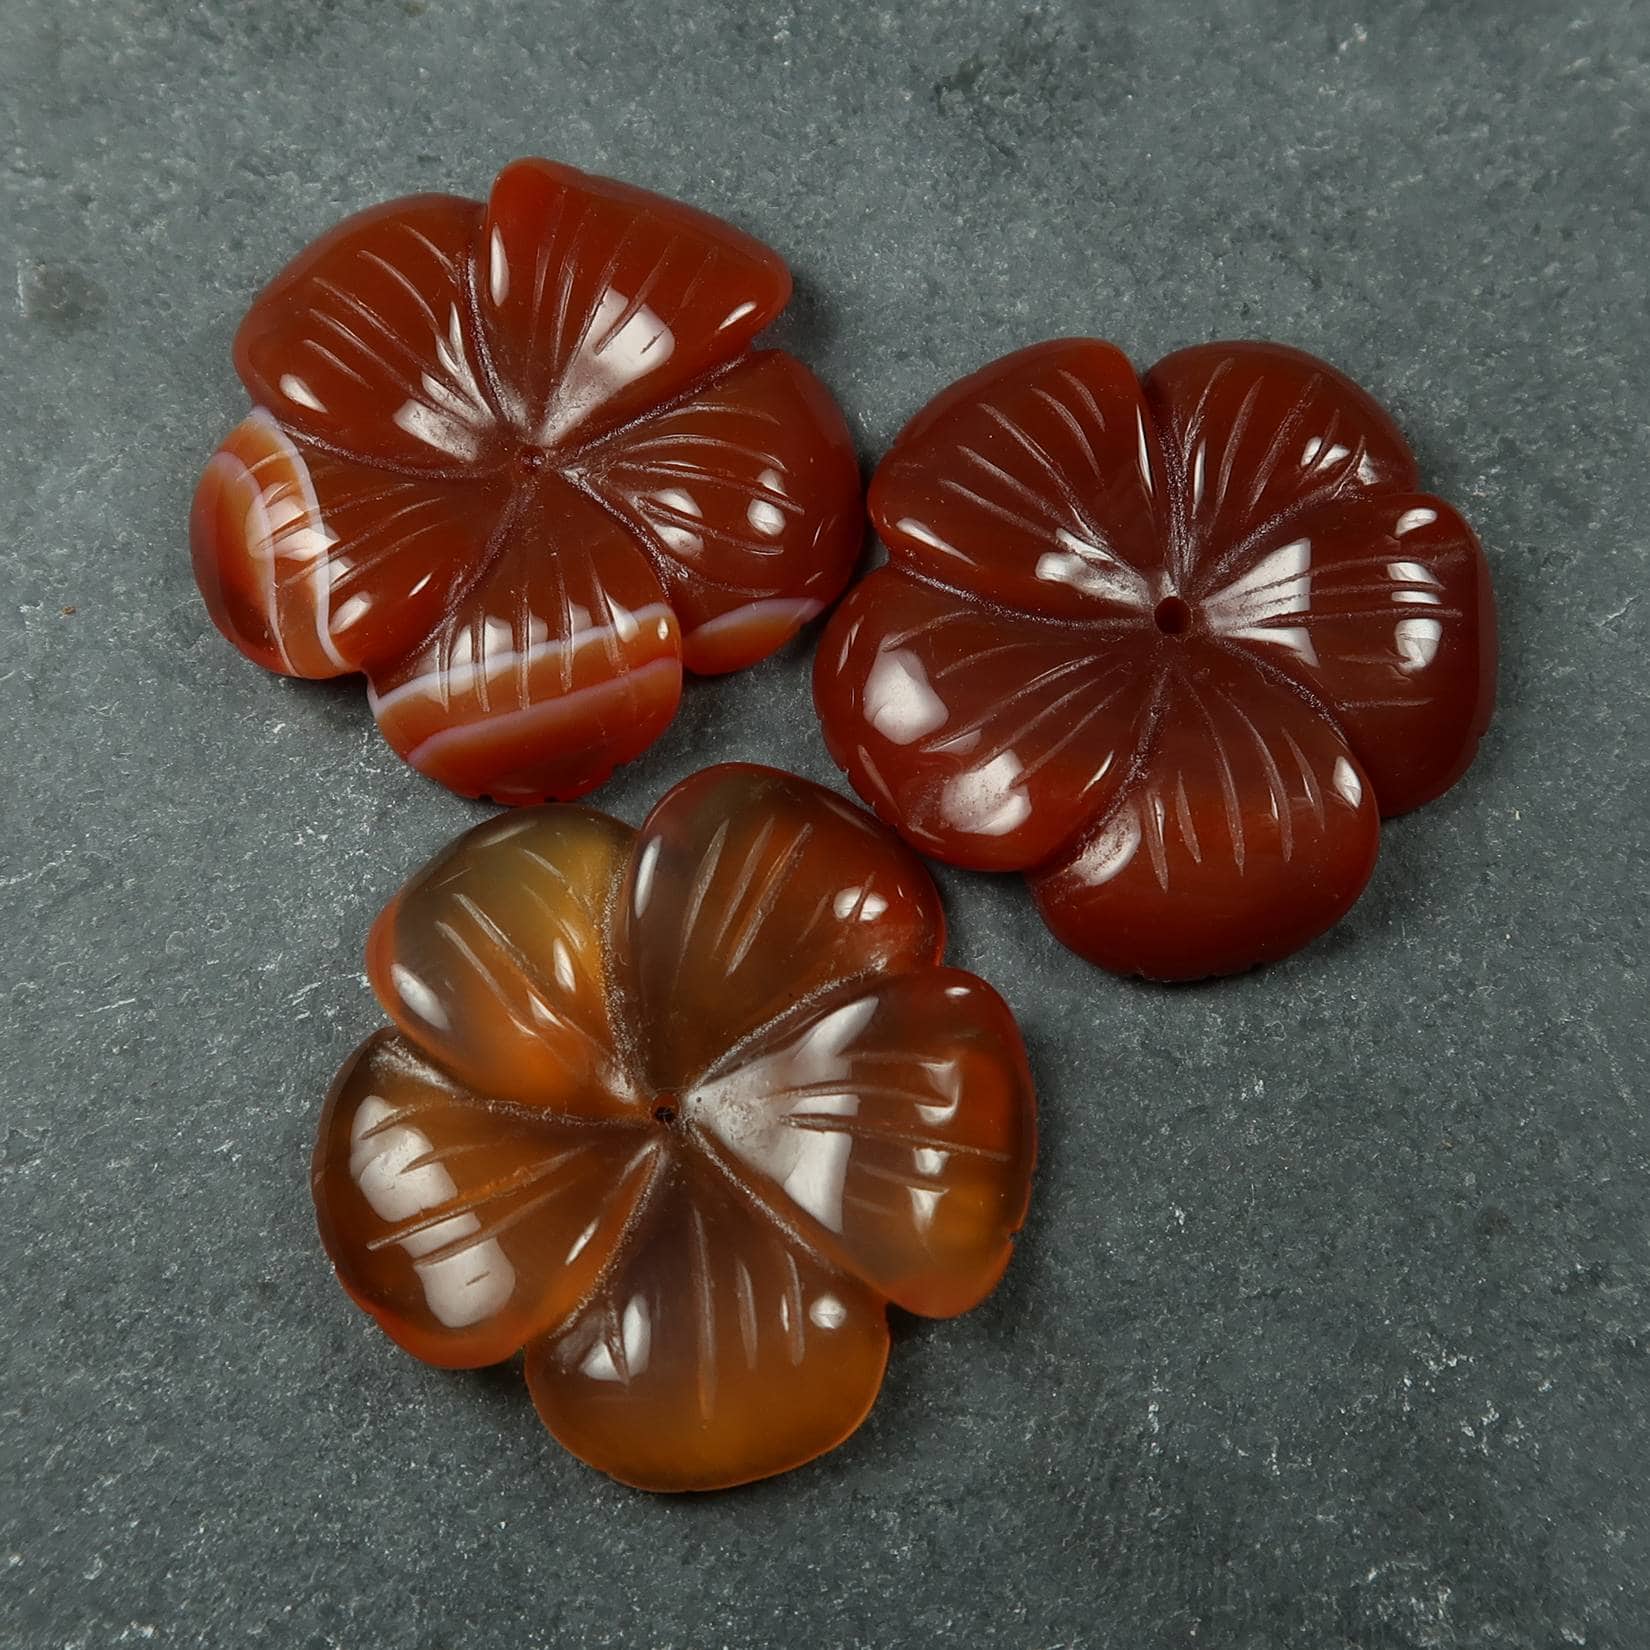 Picture showing carved Carnelian flowers